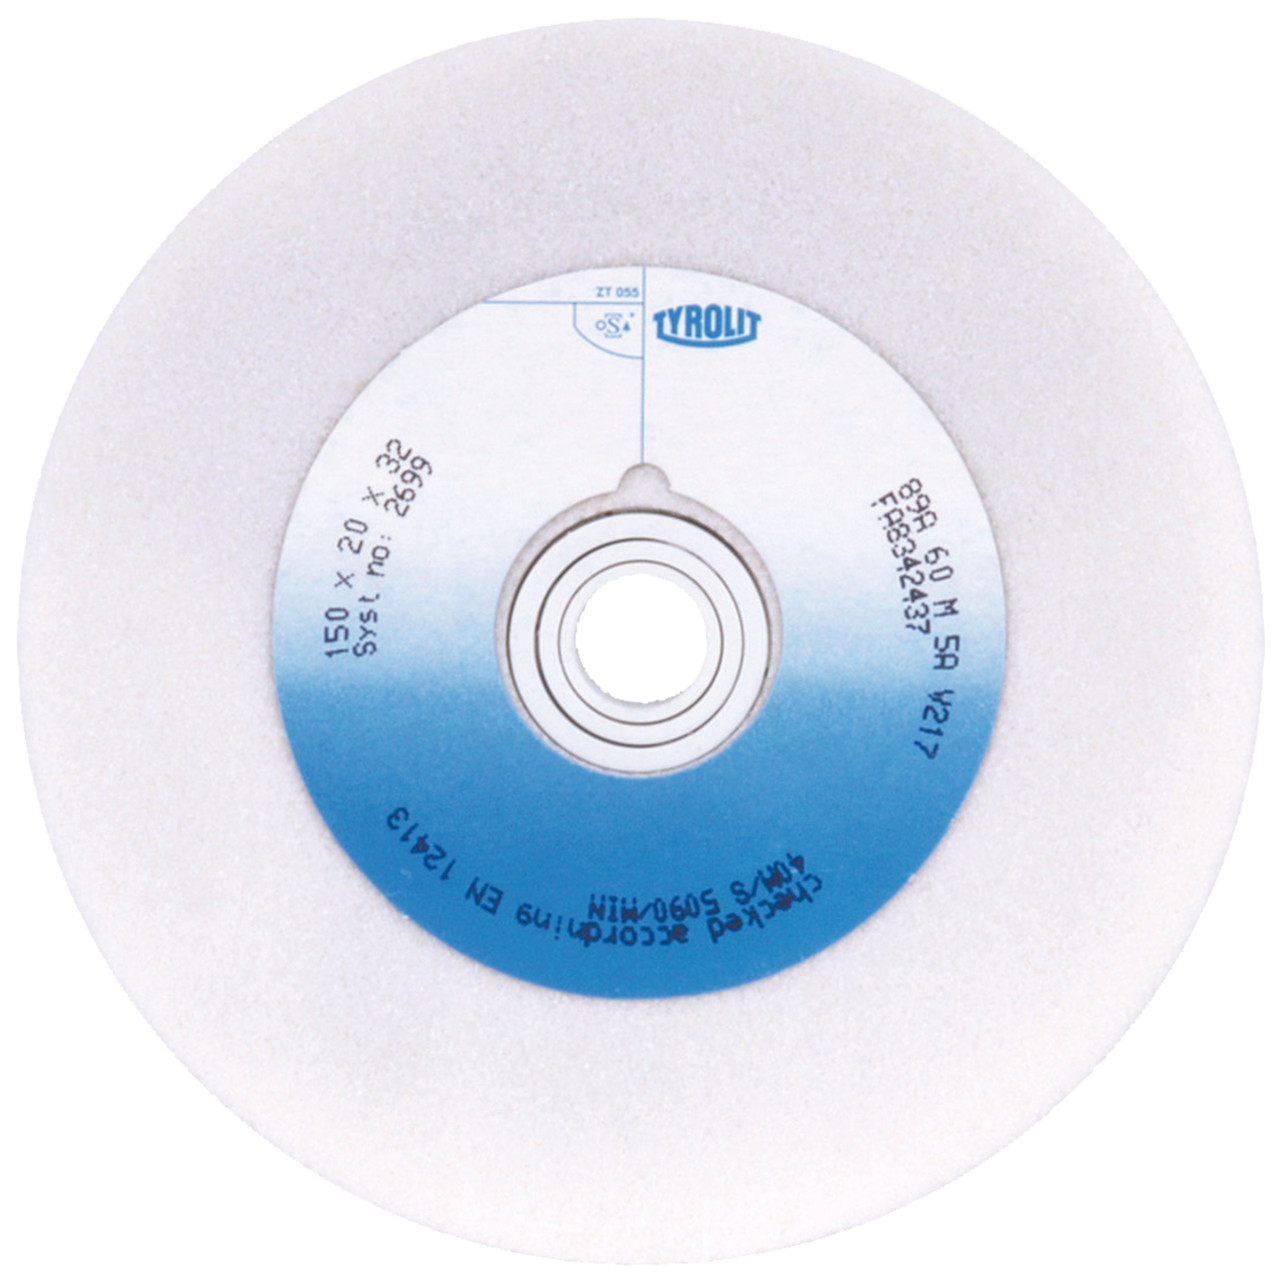 Tyrolit Conventional ceramic grinding discs DxDxH 200x25x32 For high-alloy steels and HSS, shape: 1, Art. 7374